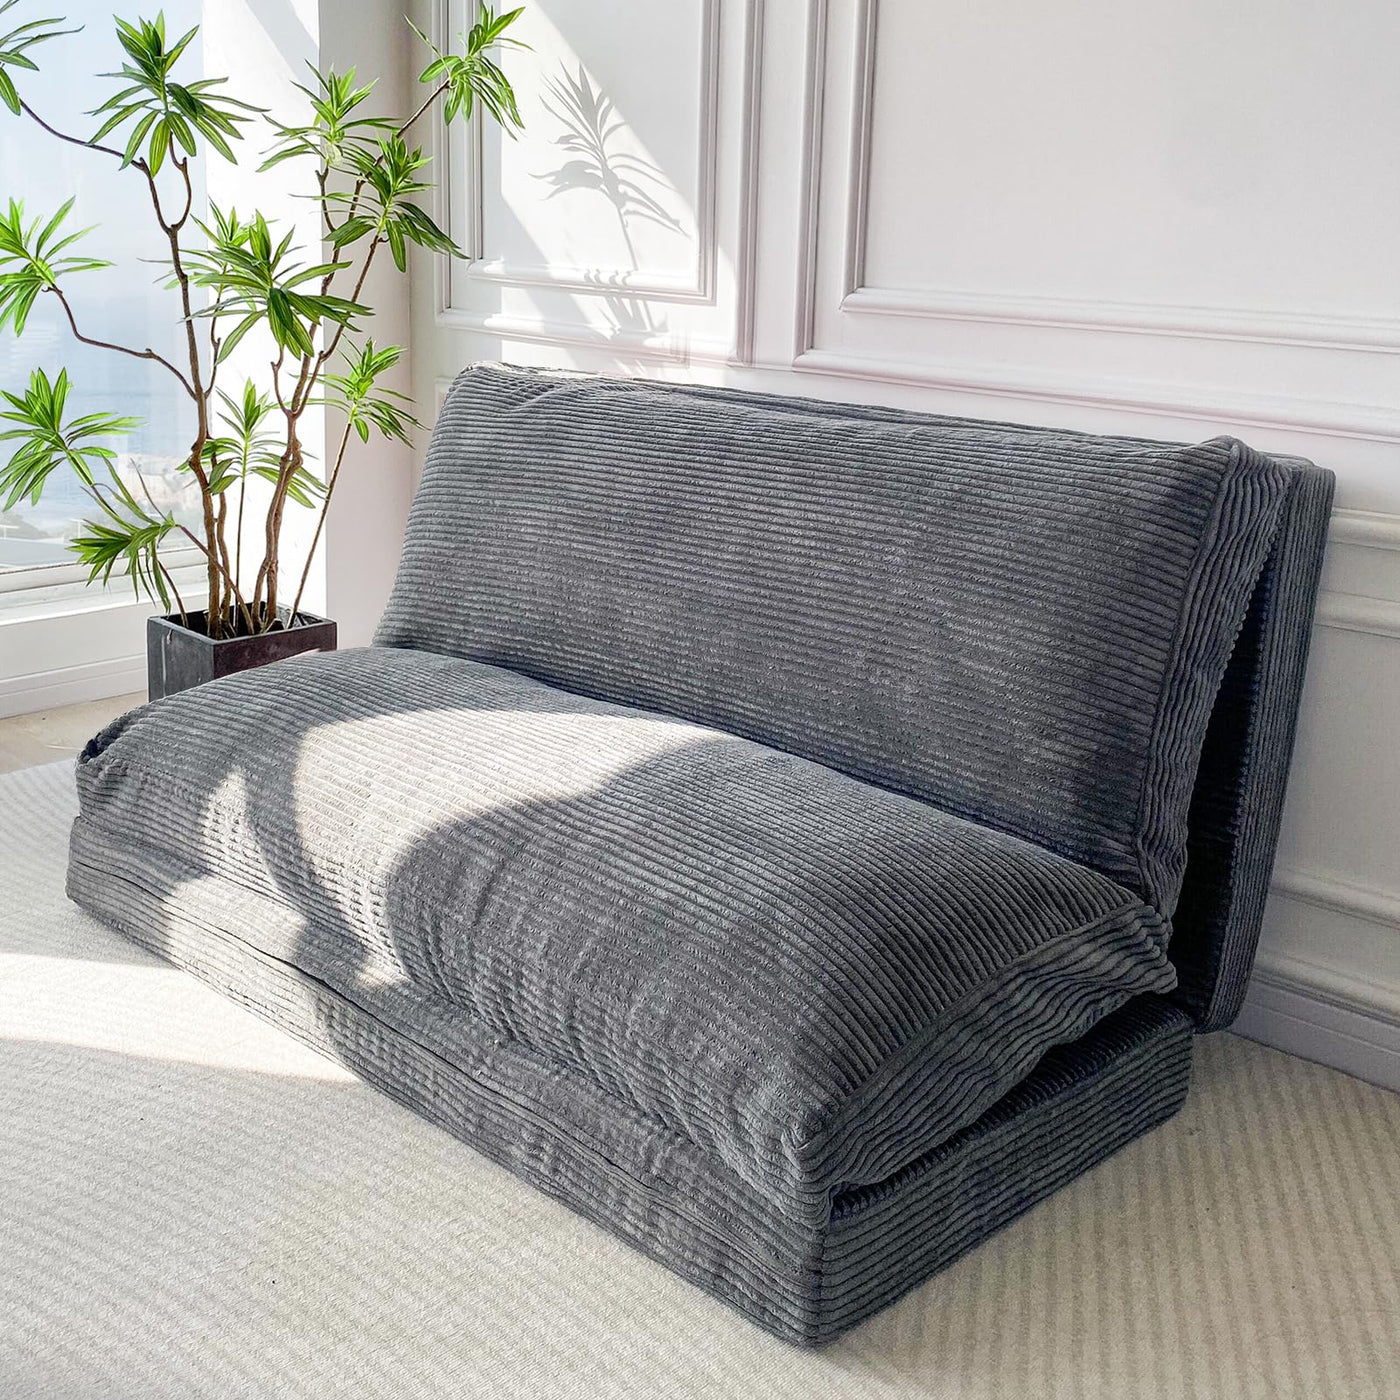 MAXYOYO Bean Bag Folding Sofa Bed with Corduroy Washable Cover, Extra Thick and Long Floor Sofa for Adults, Dark Grey